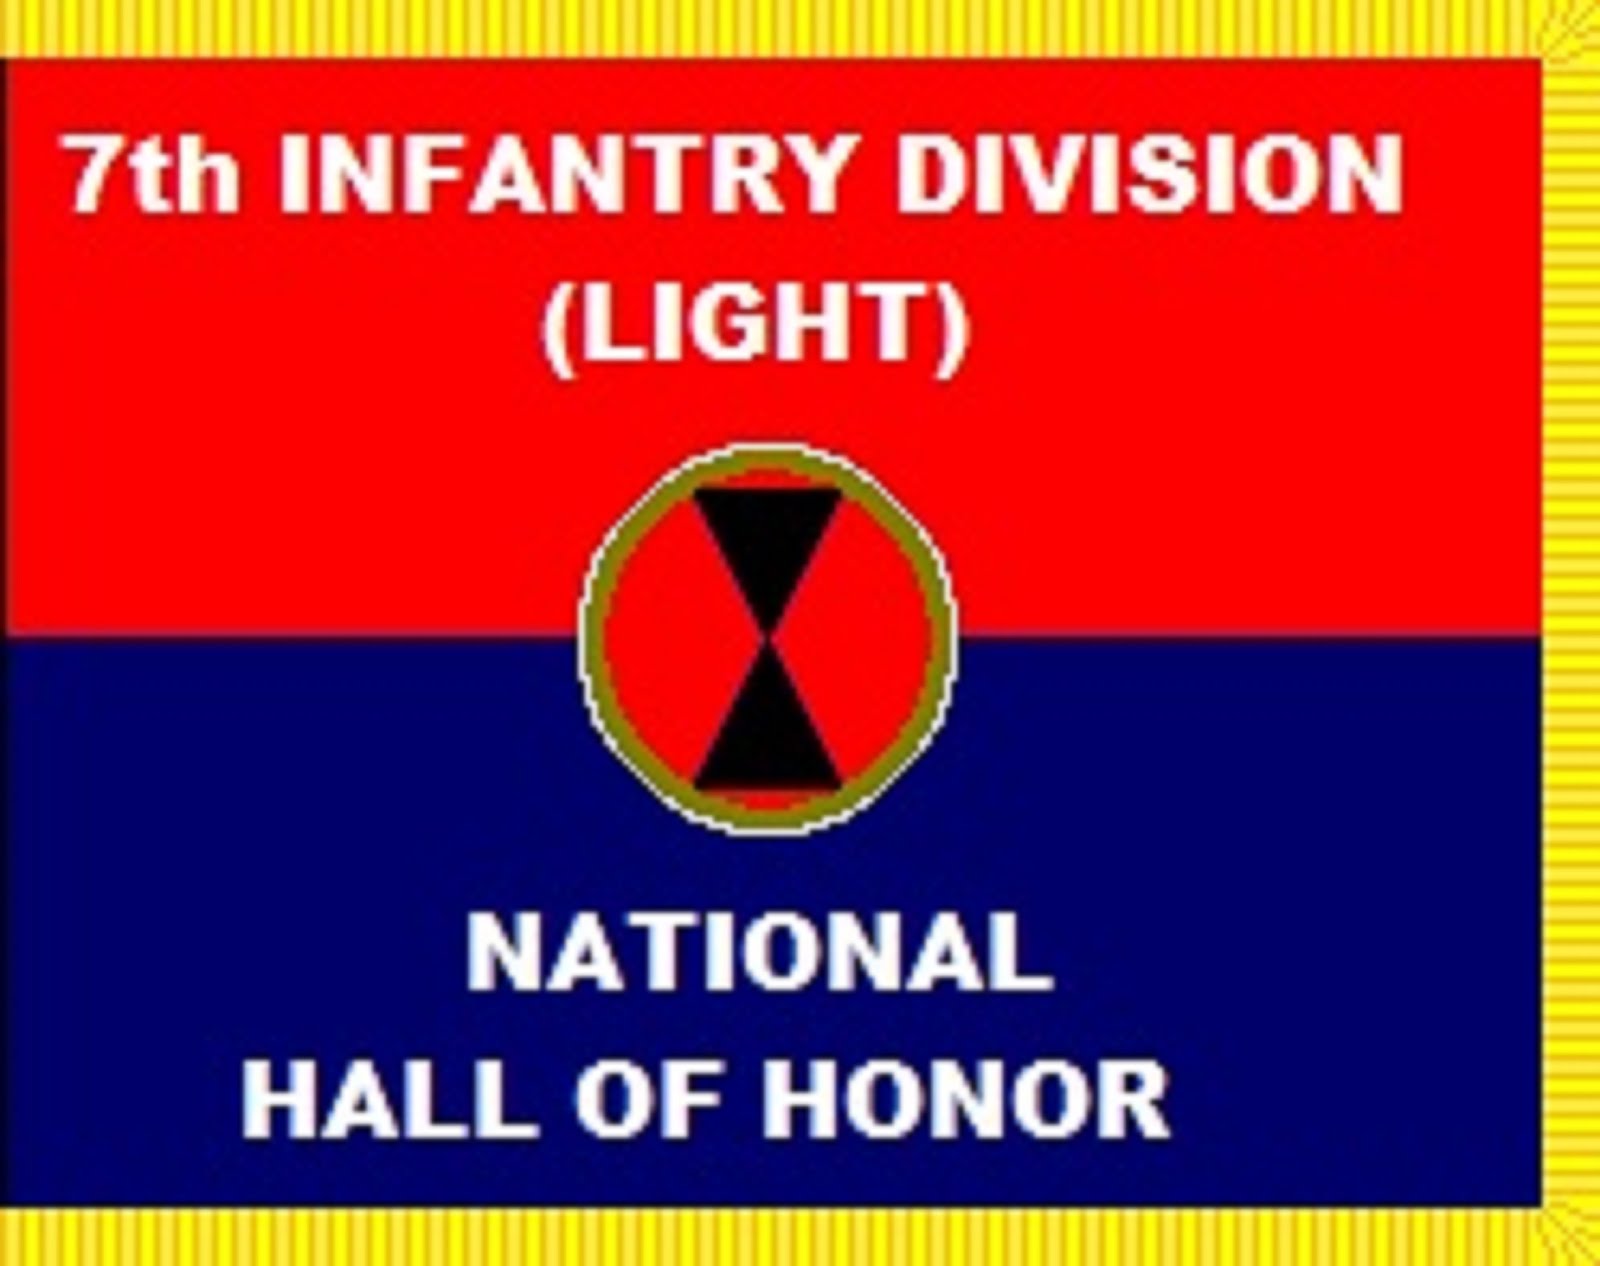 7TH INFANTRY DIVISION (LIGHT) NATIONAL HALL OF HONOR